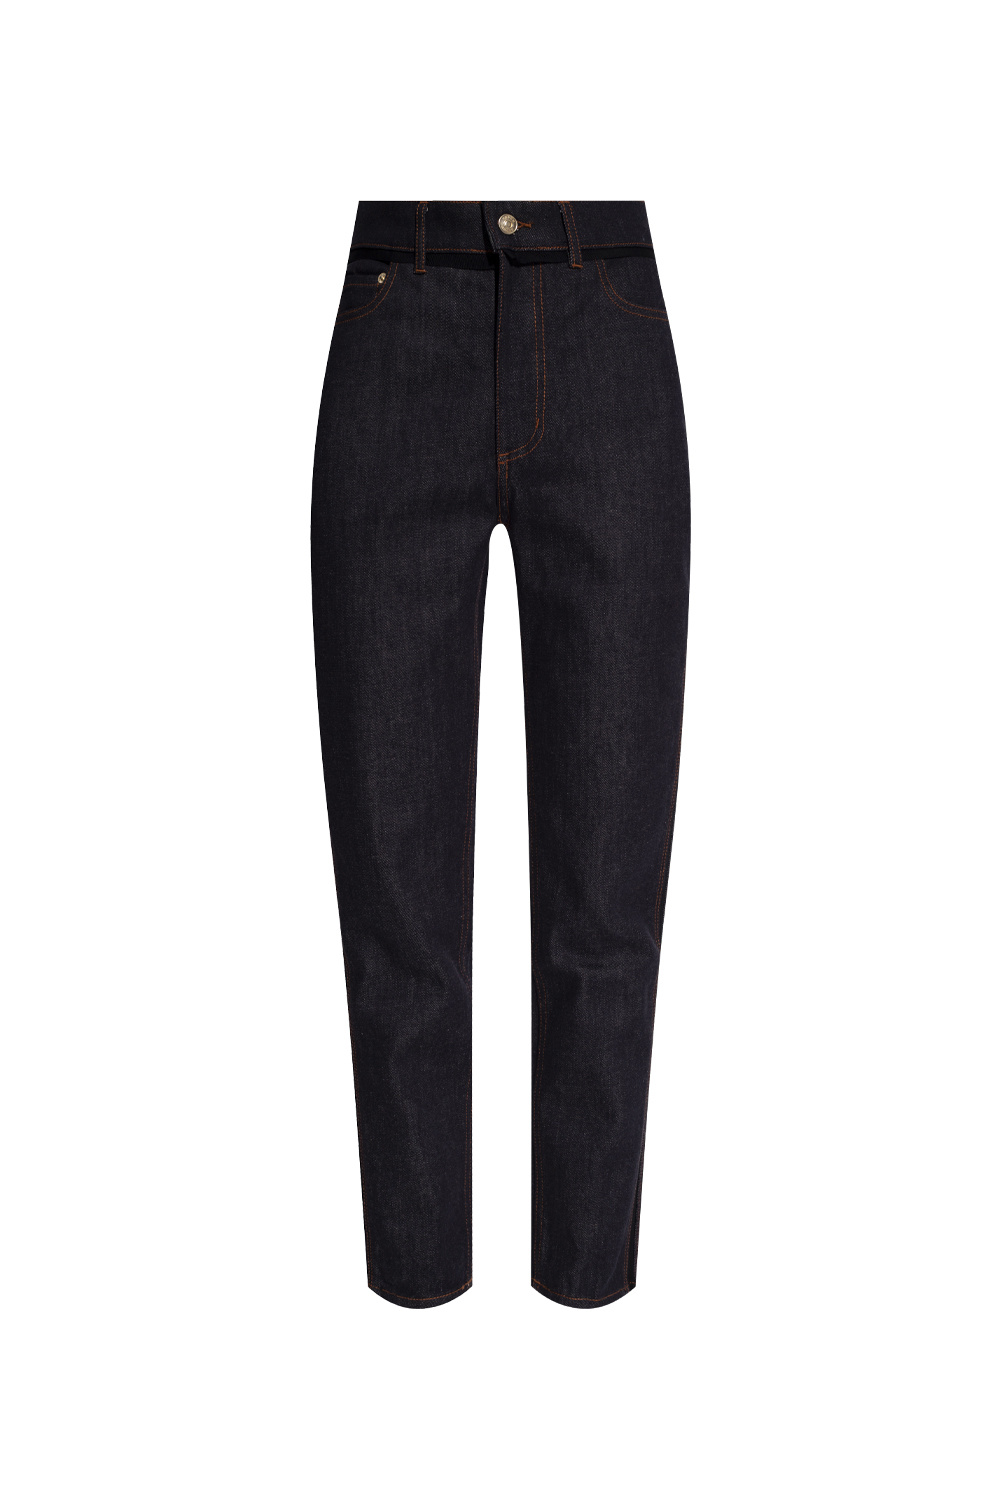 Erdem Jeans with stitching